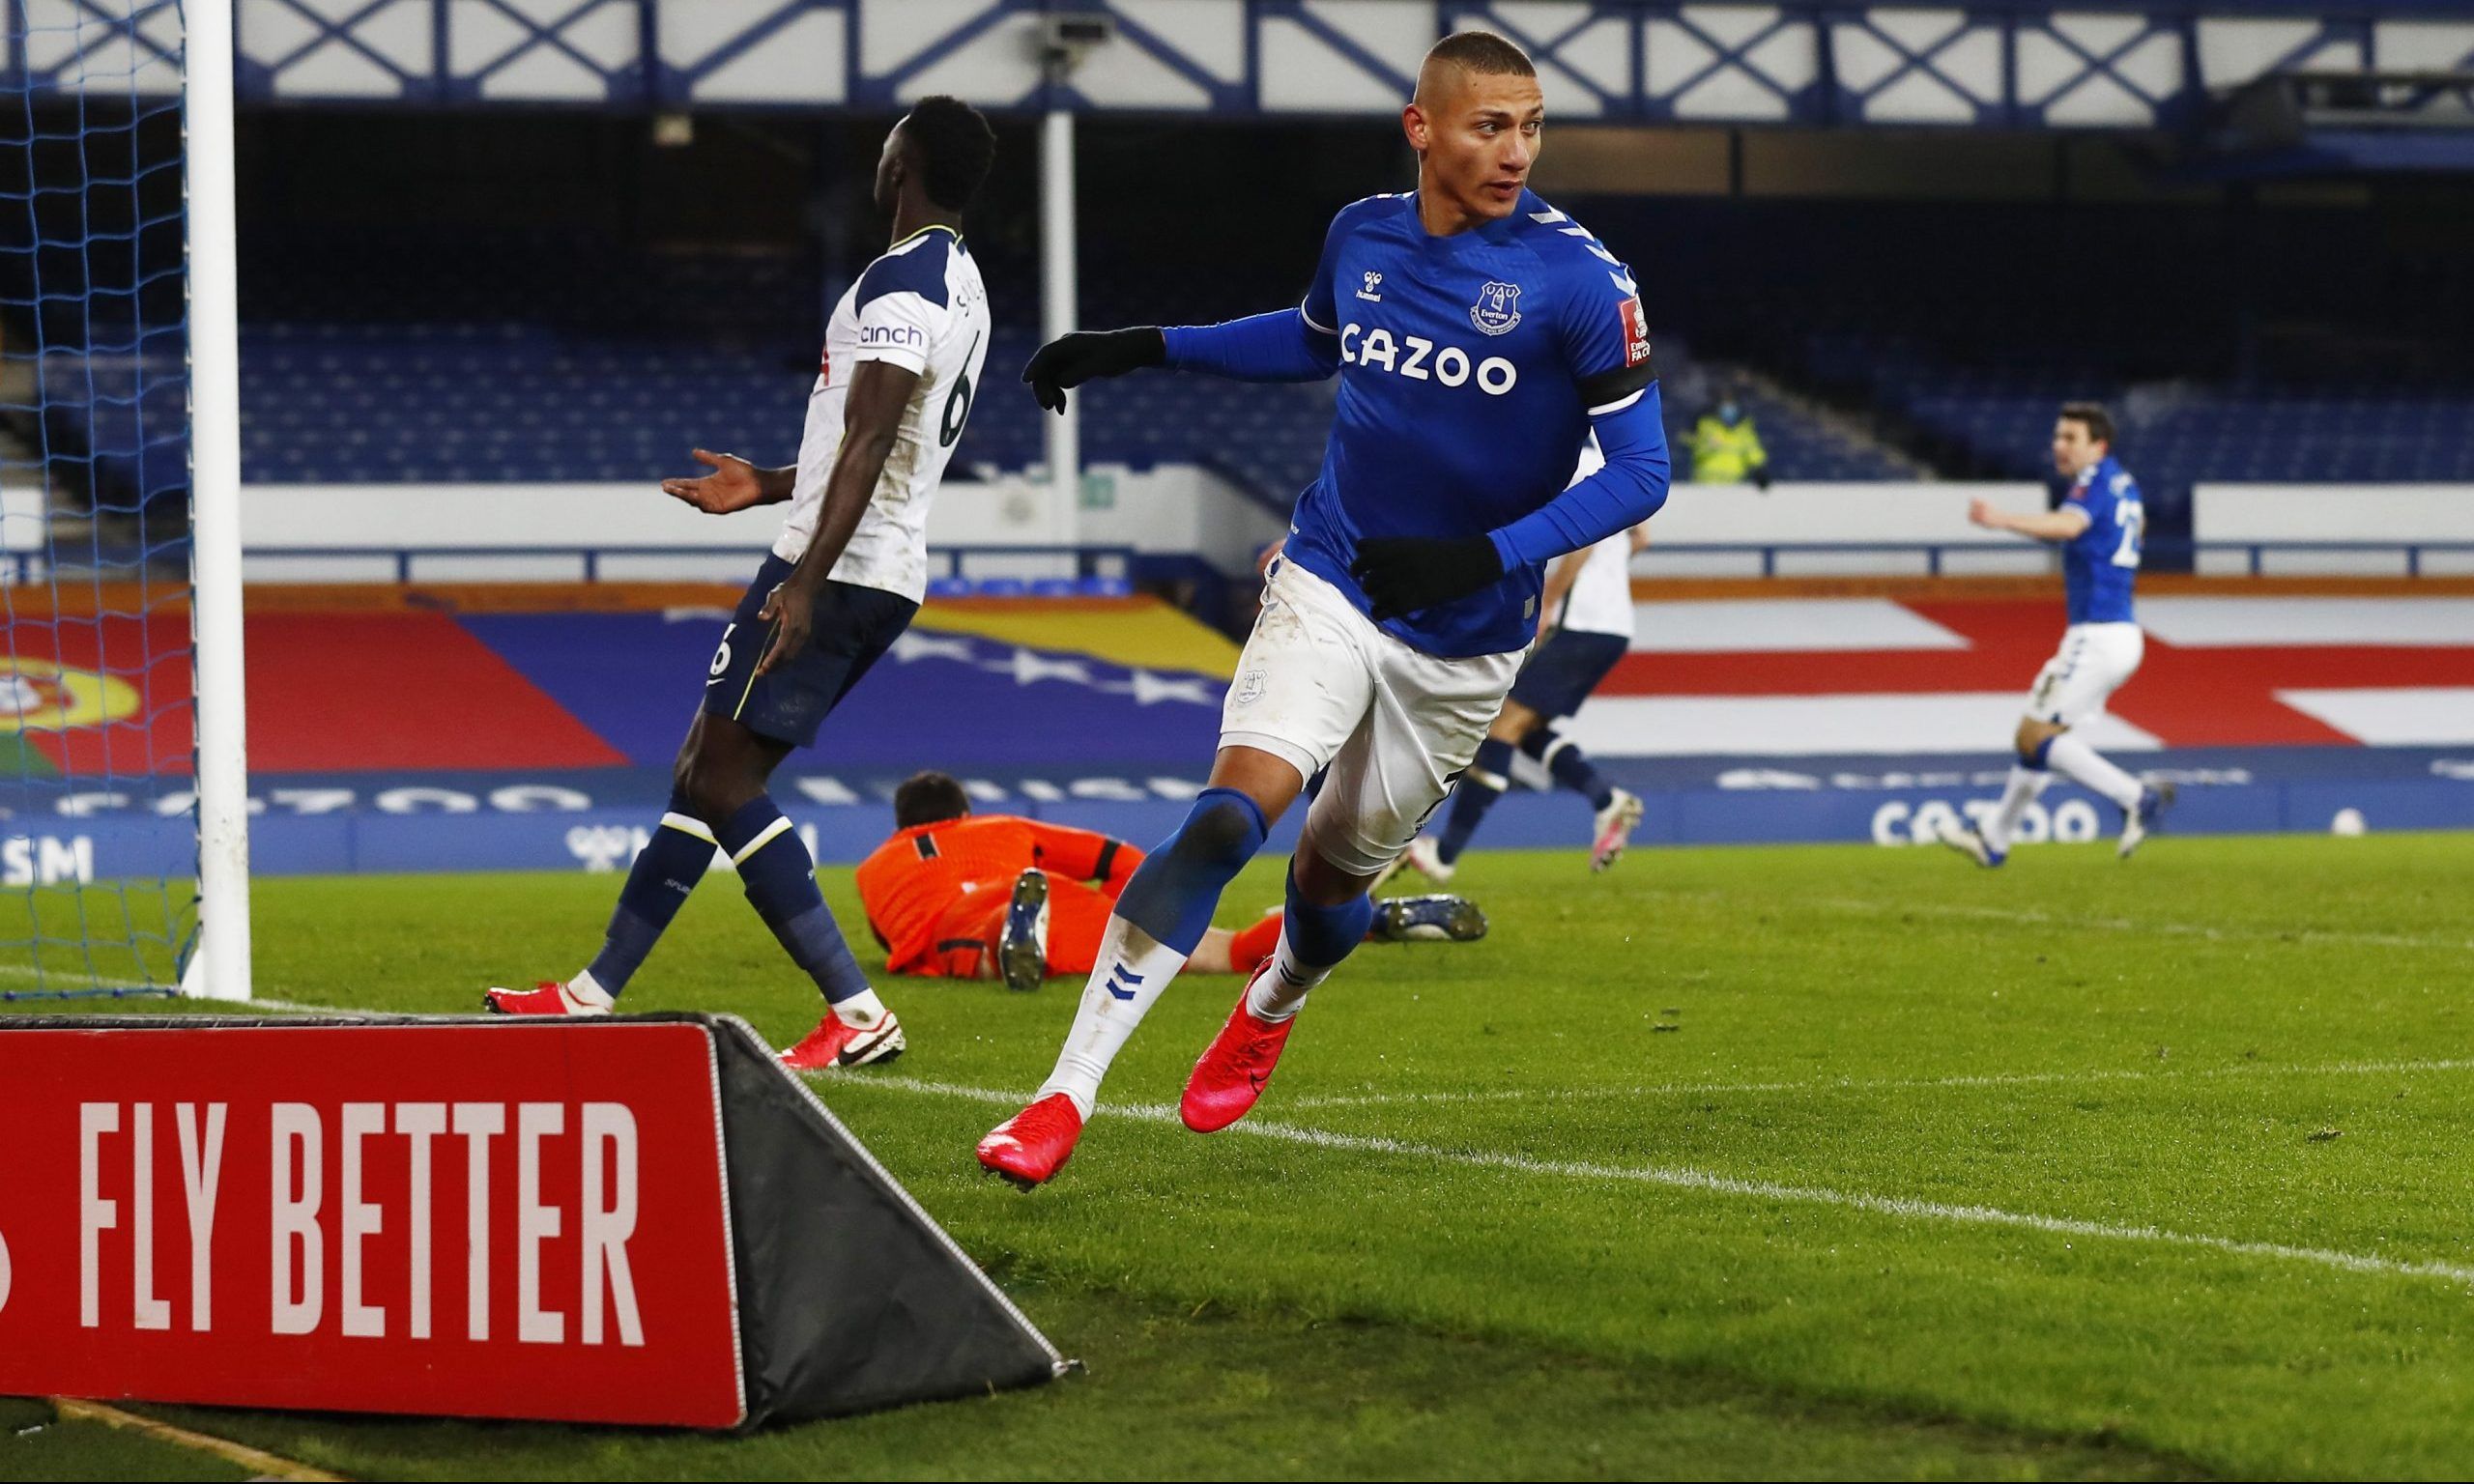 Everton's Richarlison scores against Spurs in the FA Cup